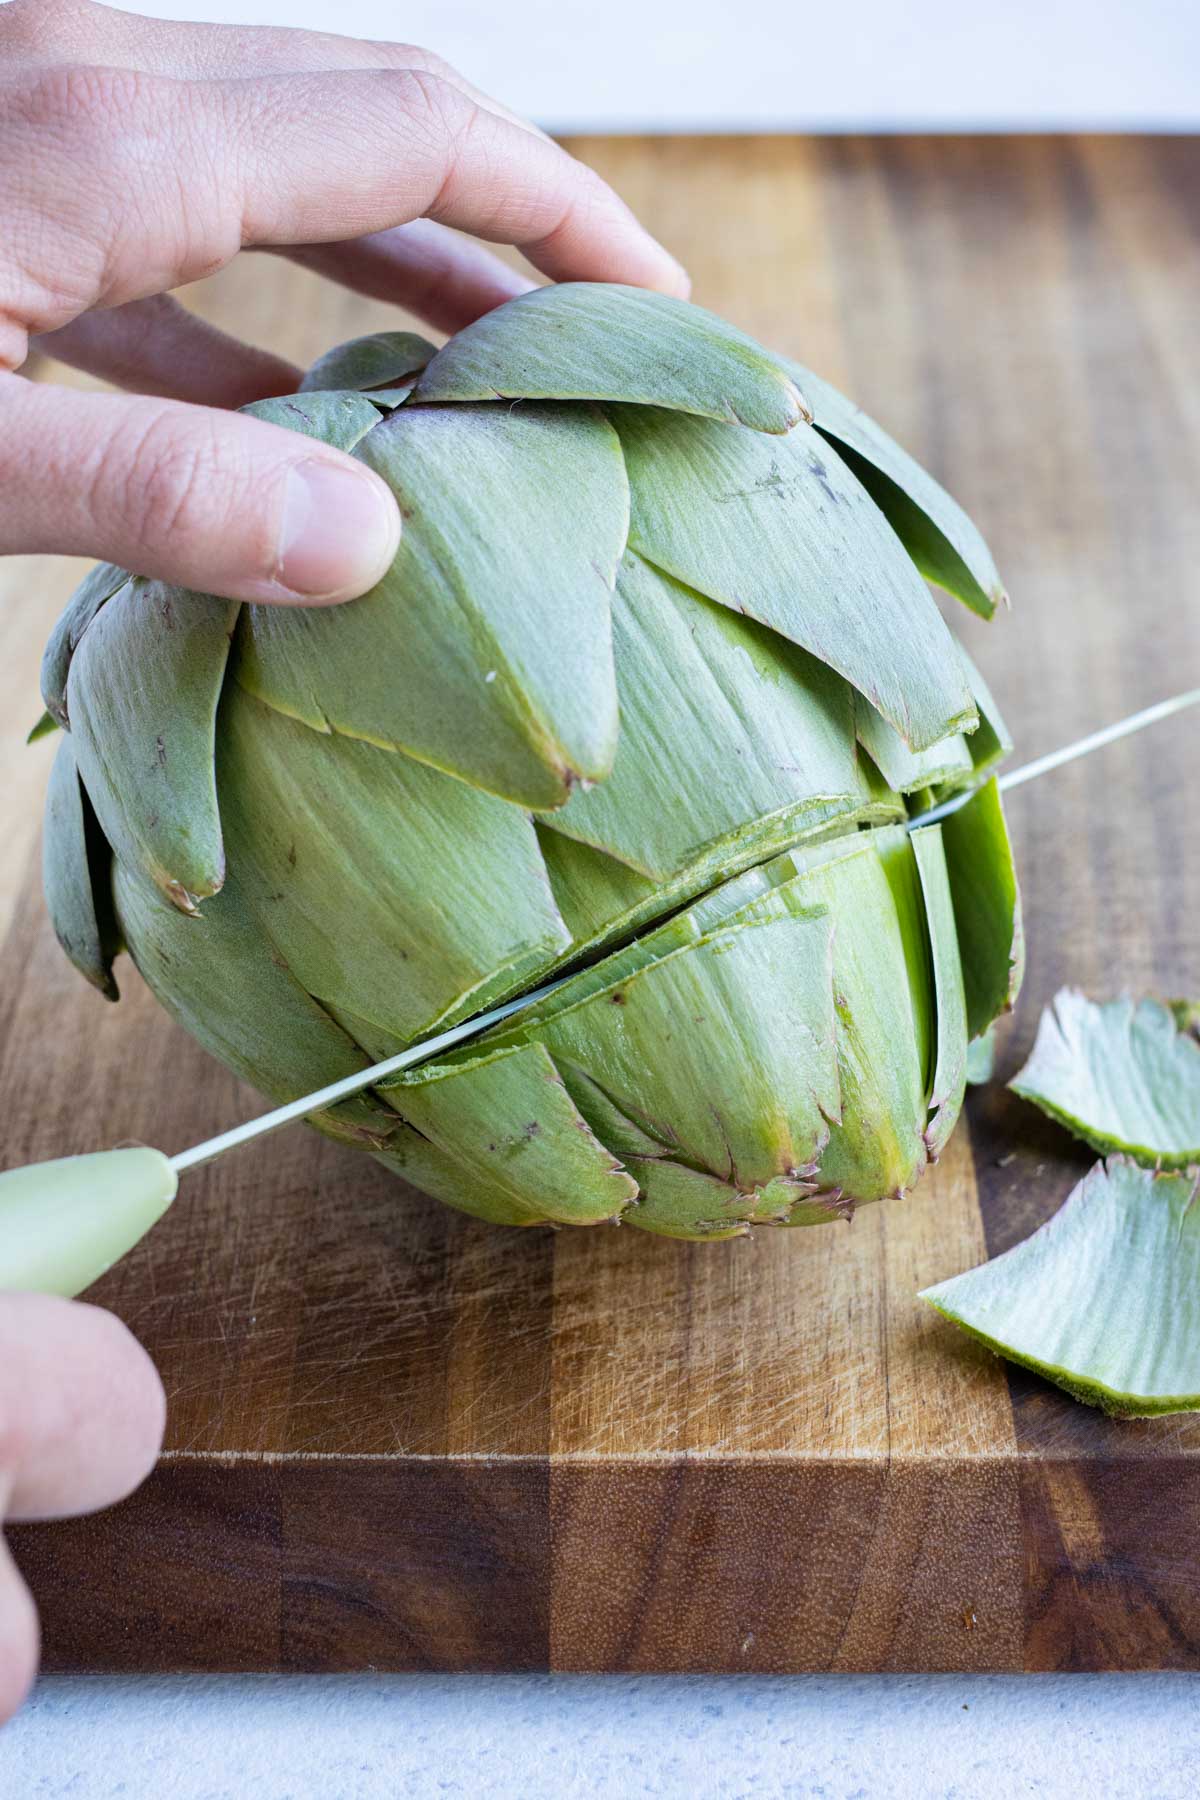 The top is cut off the artichoke for this recipe.